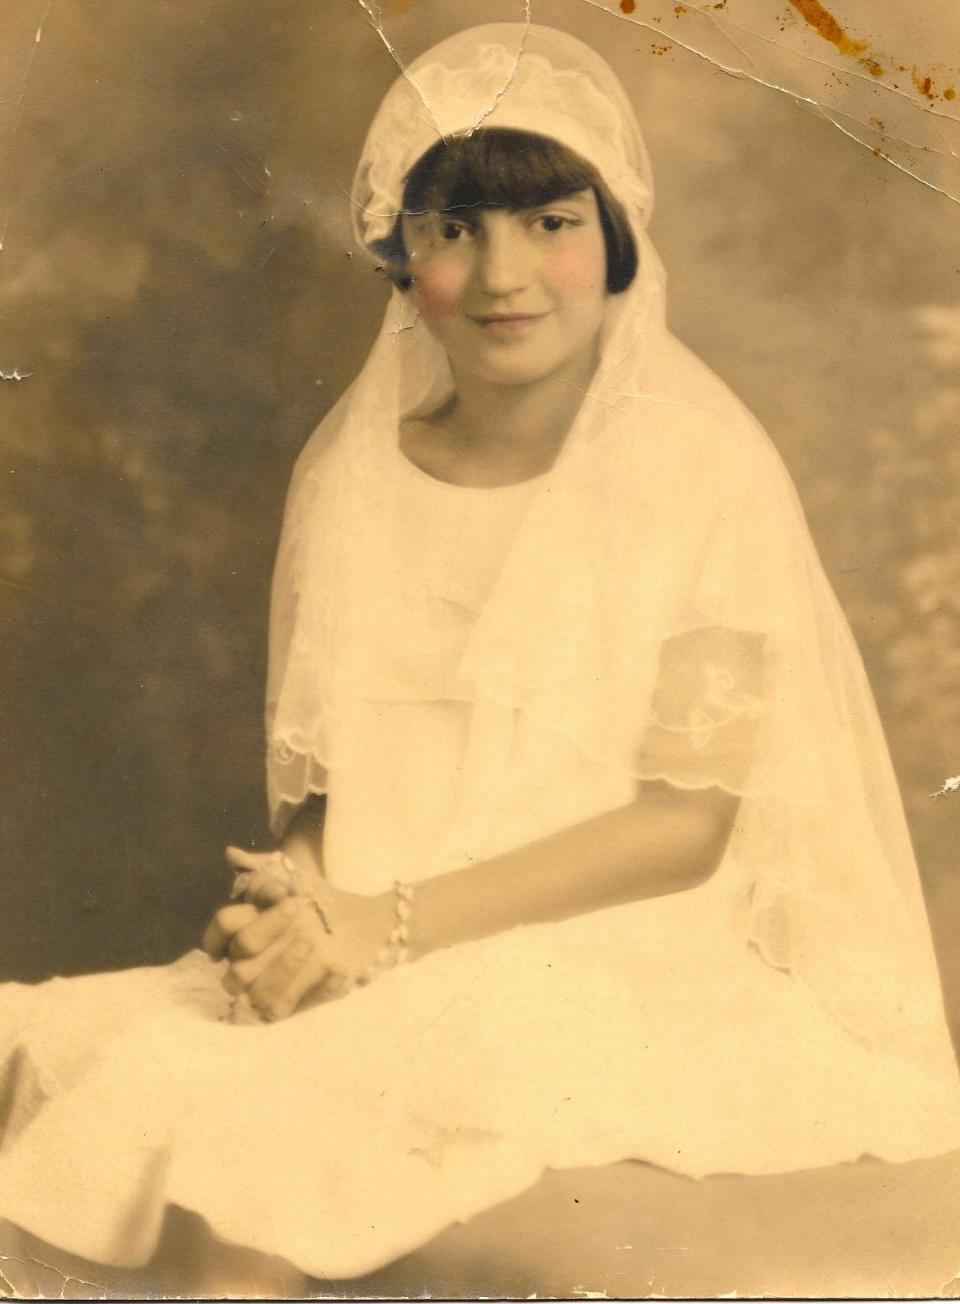 At age 8, Mildred "Millie" Moulton was confirmed at St. Anthony Parish in the Allston neighborhood in Boston on June 8, 1932.